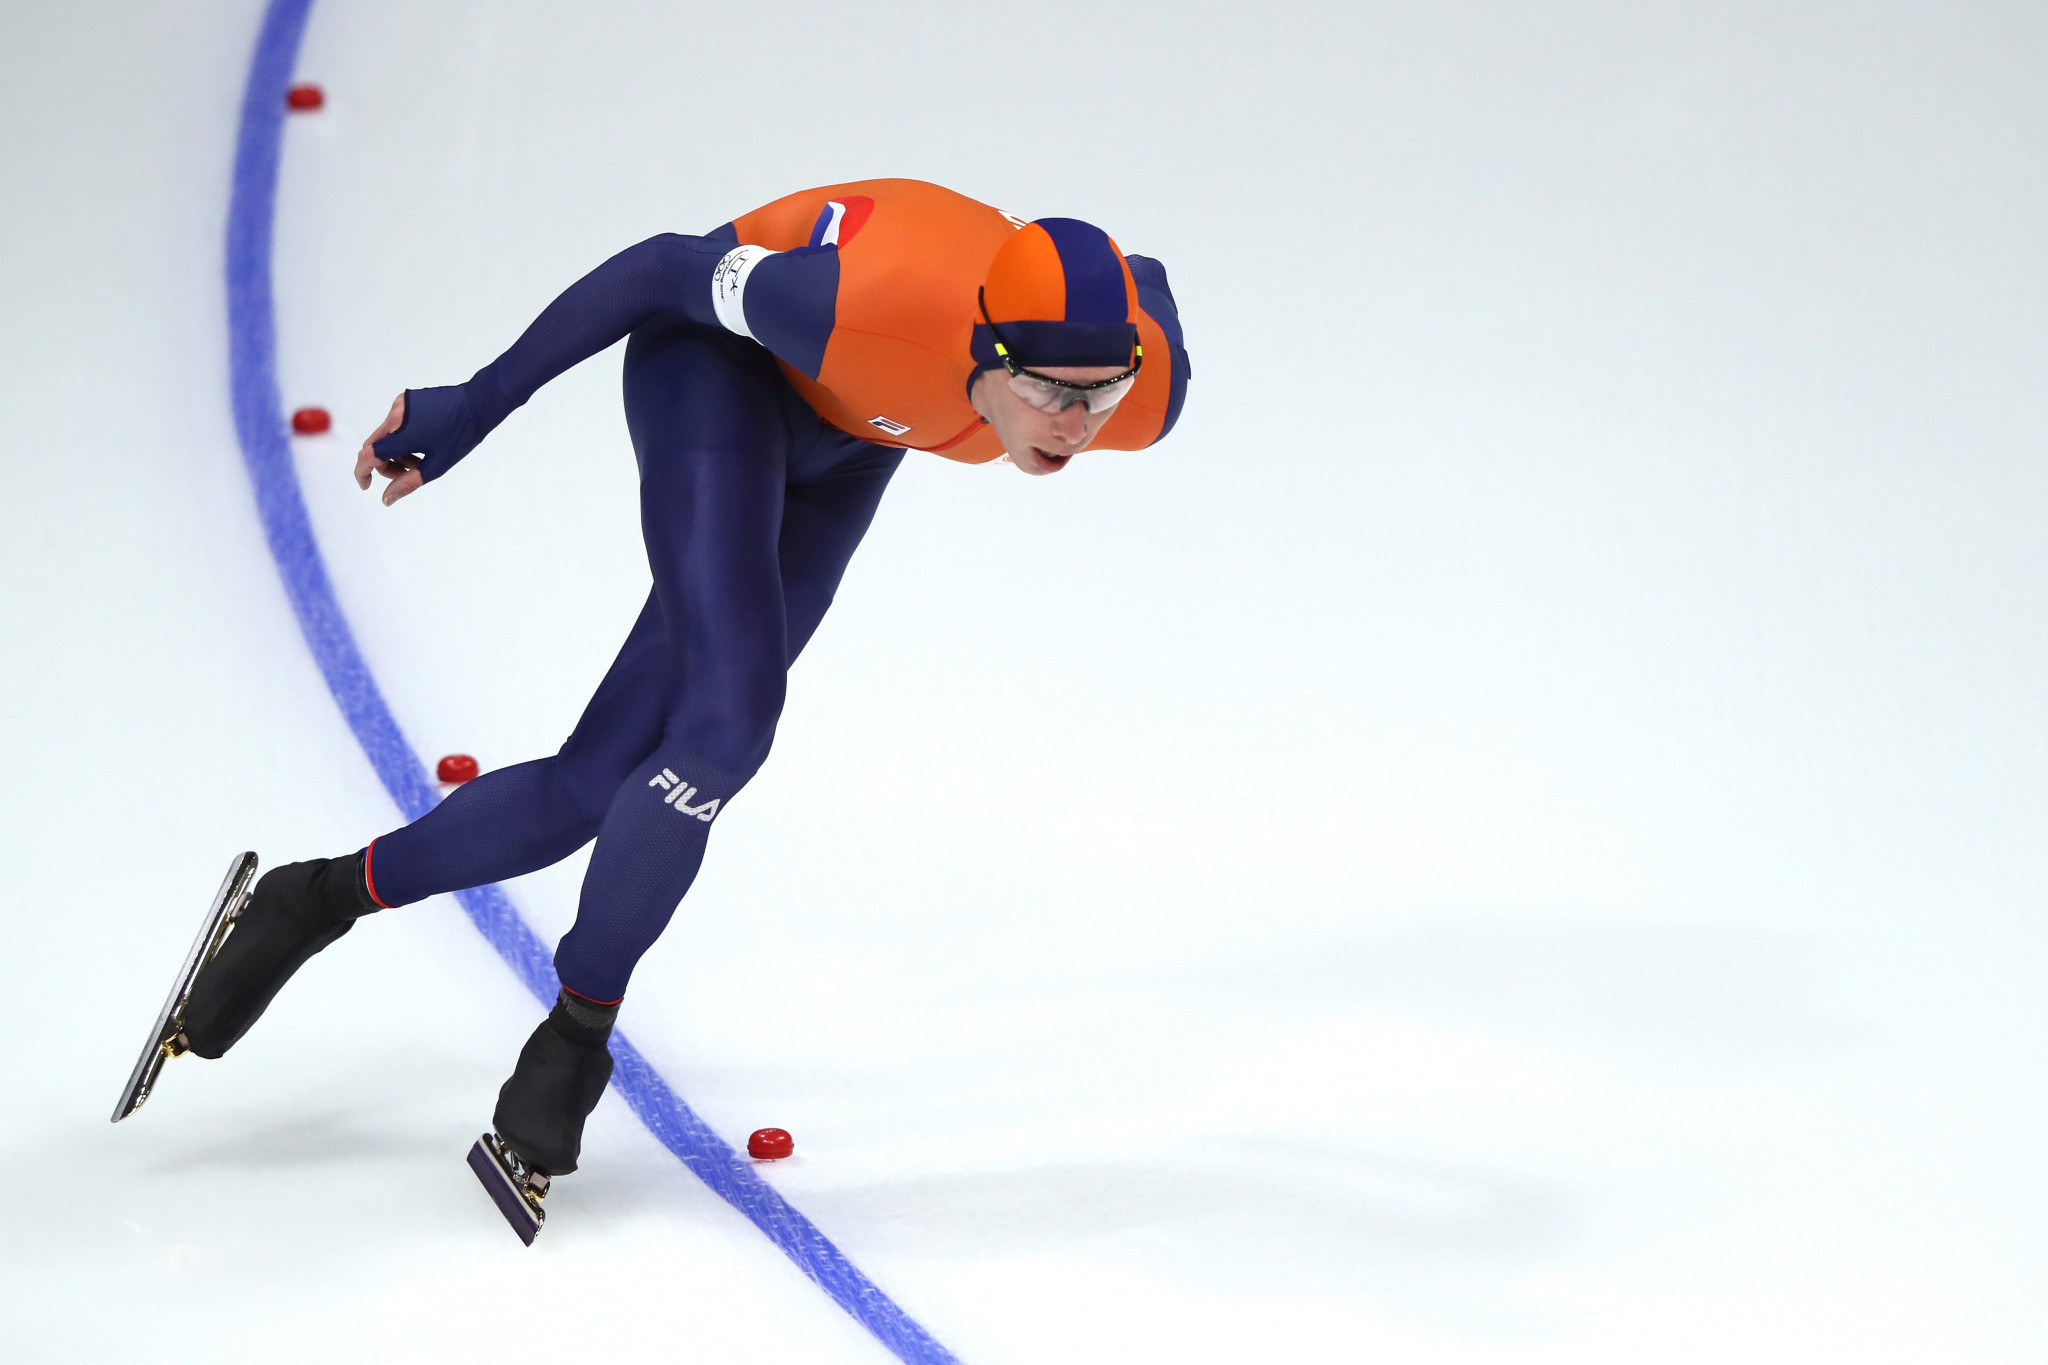 The Netherlands' Jorrit Bergsma had to settle for the silver medal, despite breaking the Olympic record he set to win gold at Sochi 2014 ©Getty Images